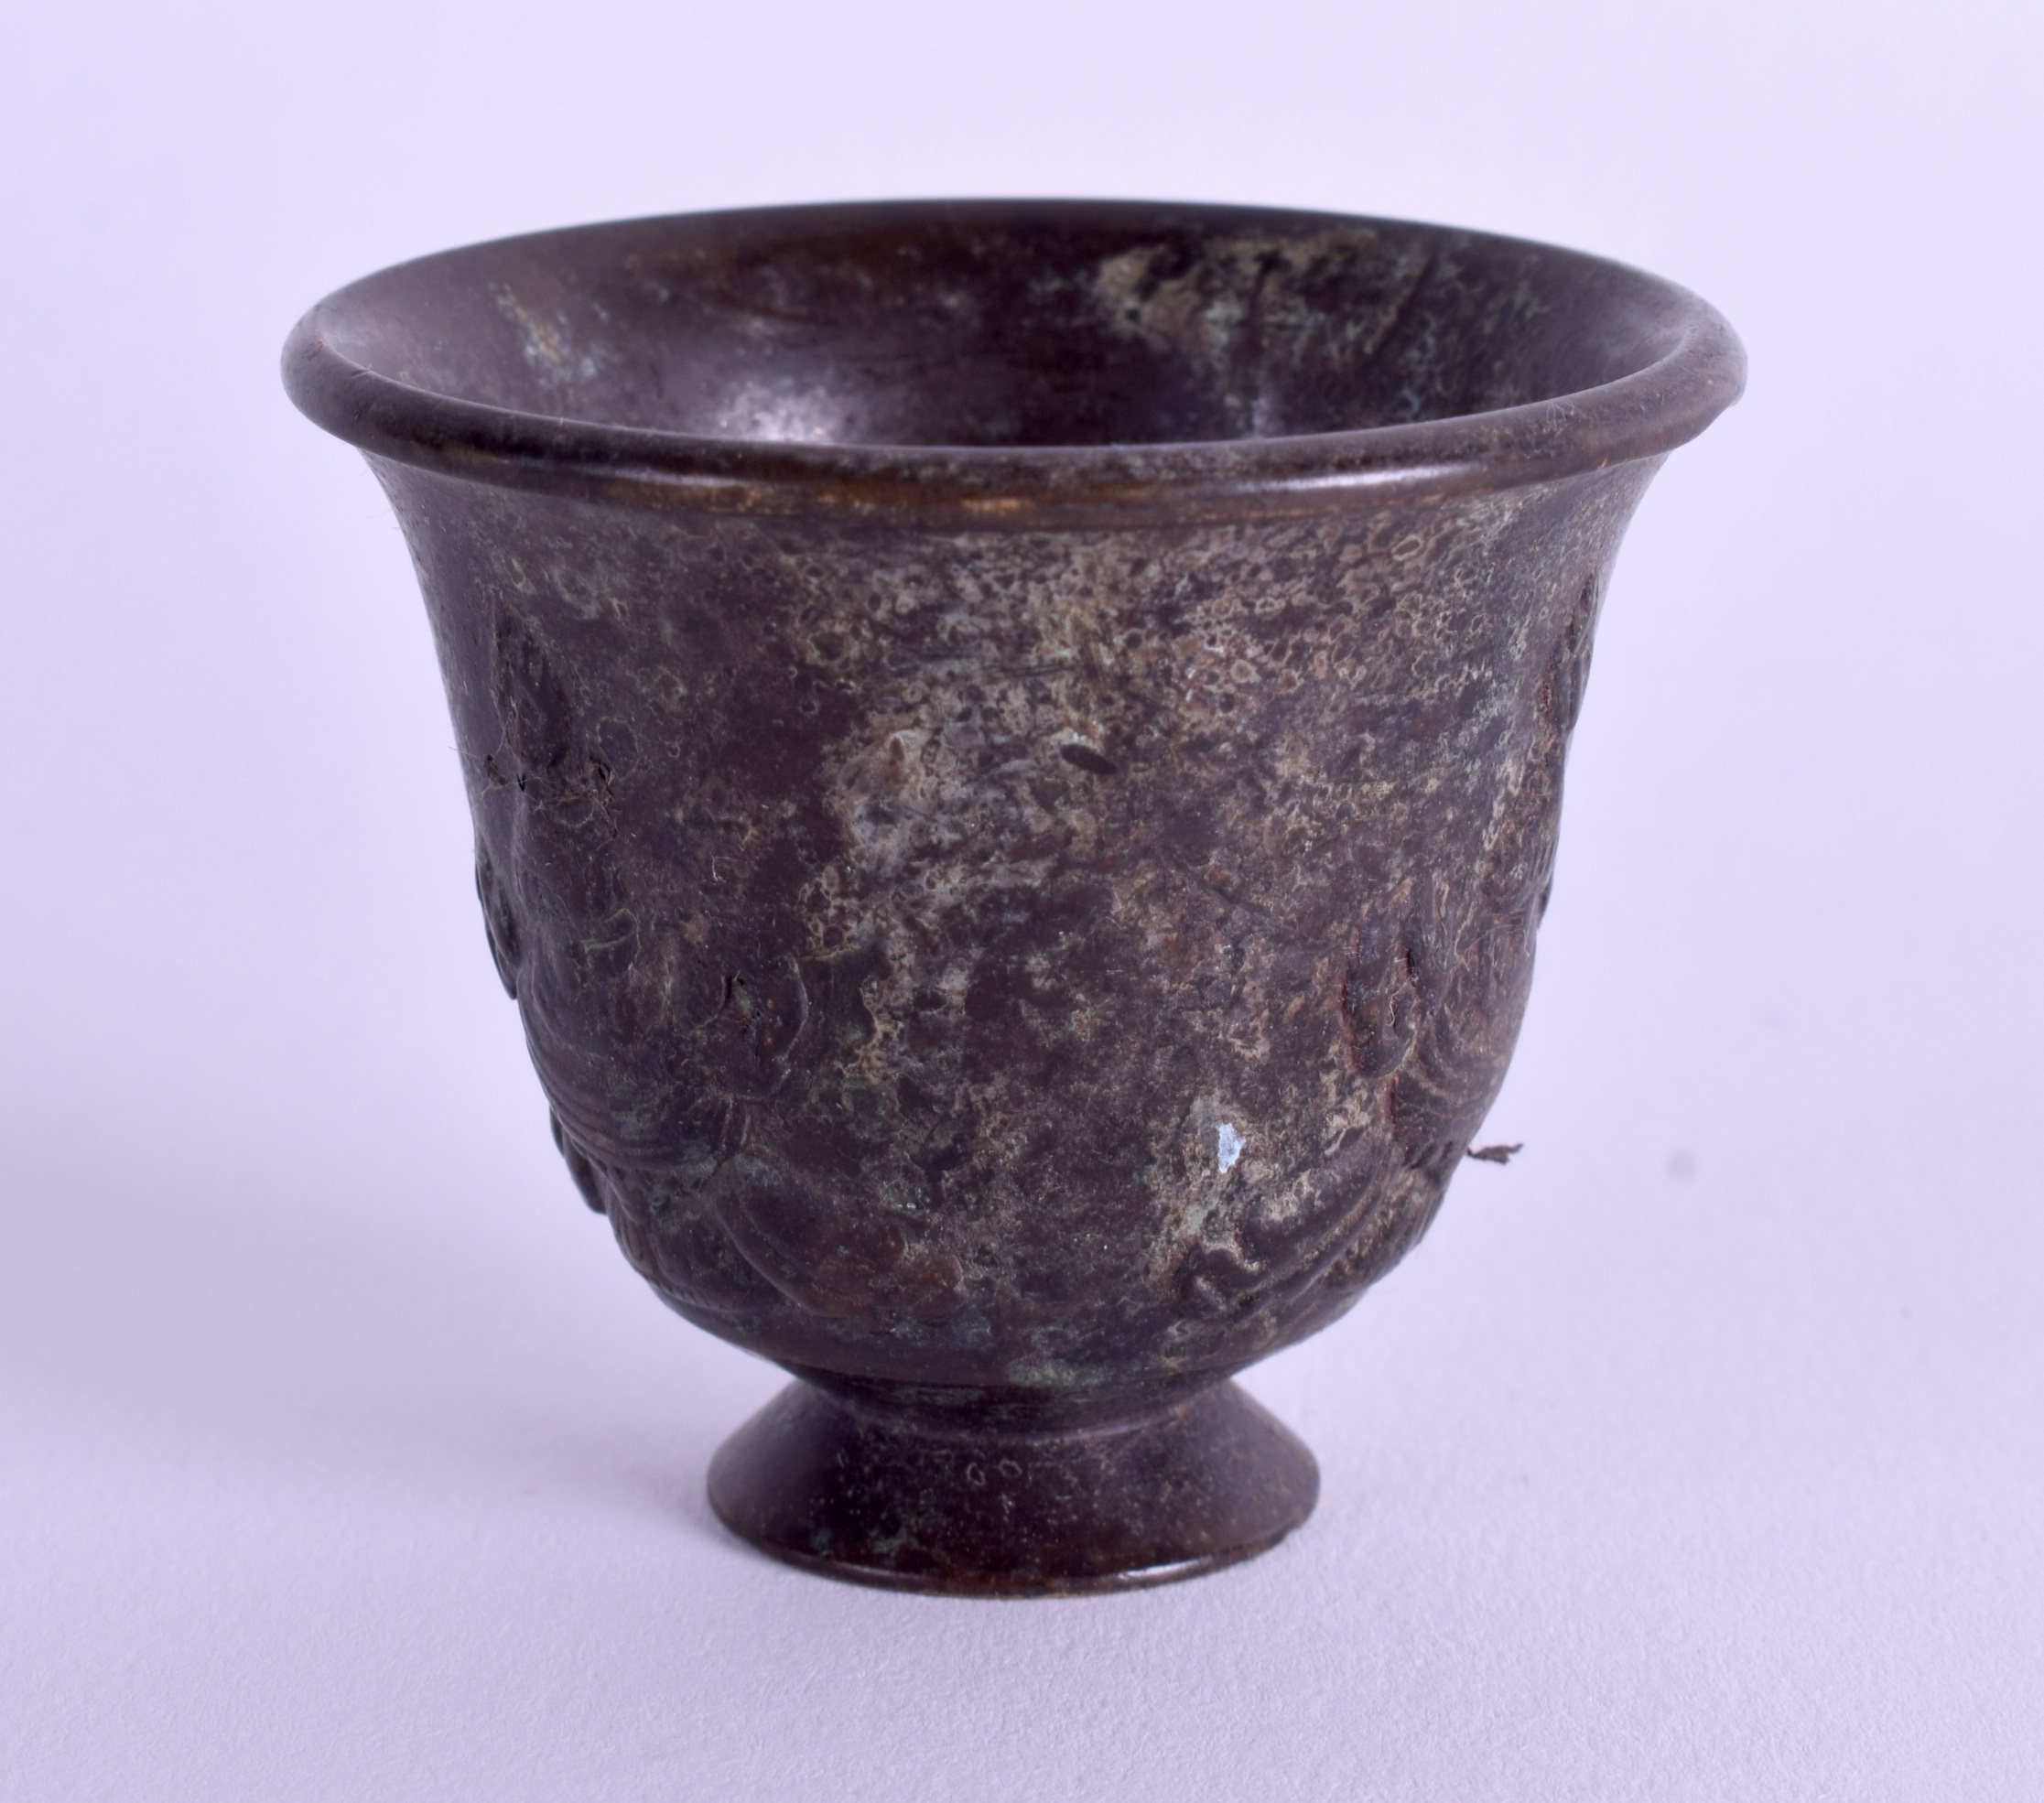 A CHINESE TIBETAN BRONZE CUP. 4.5 cm high. - Image 2 of 4